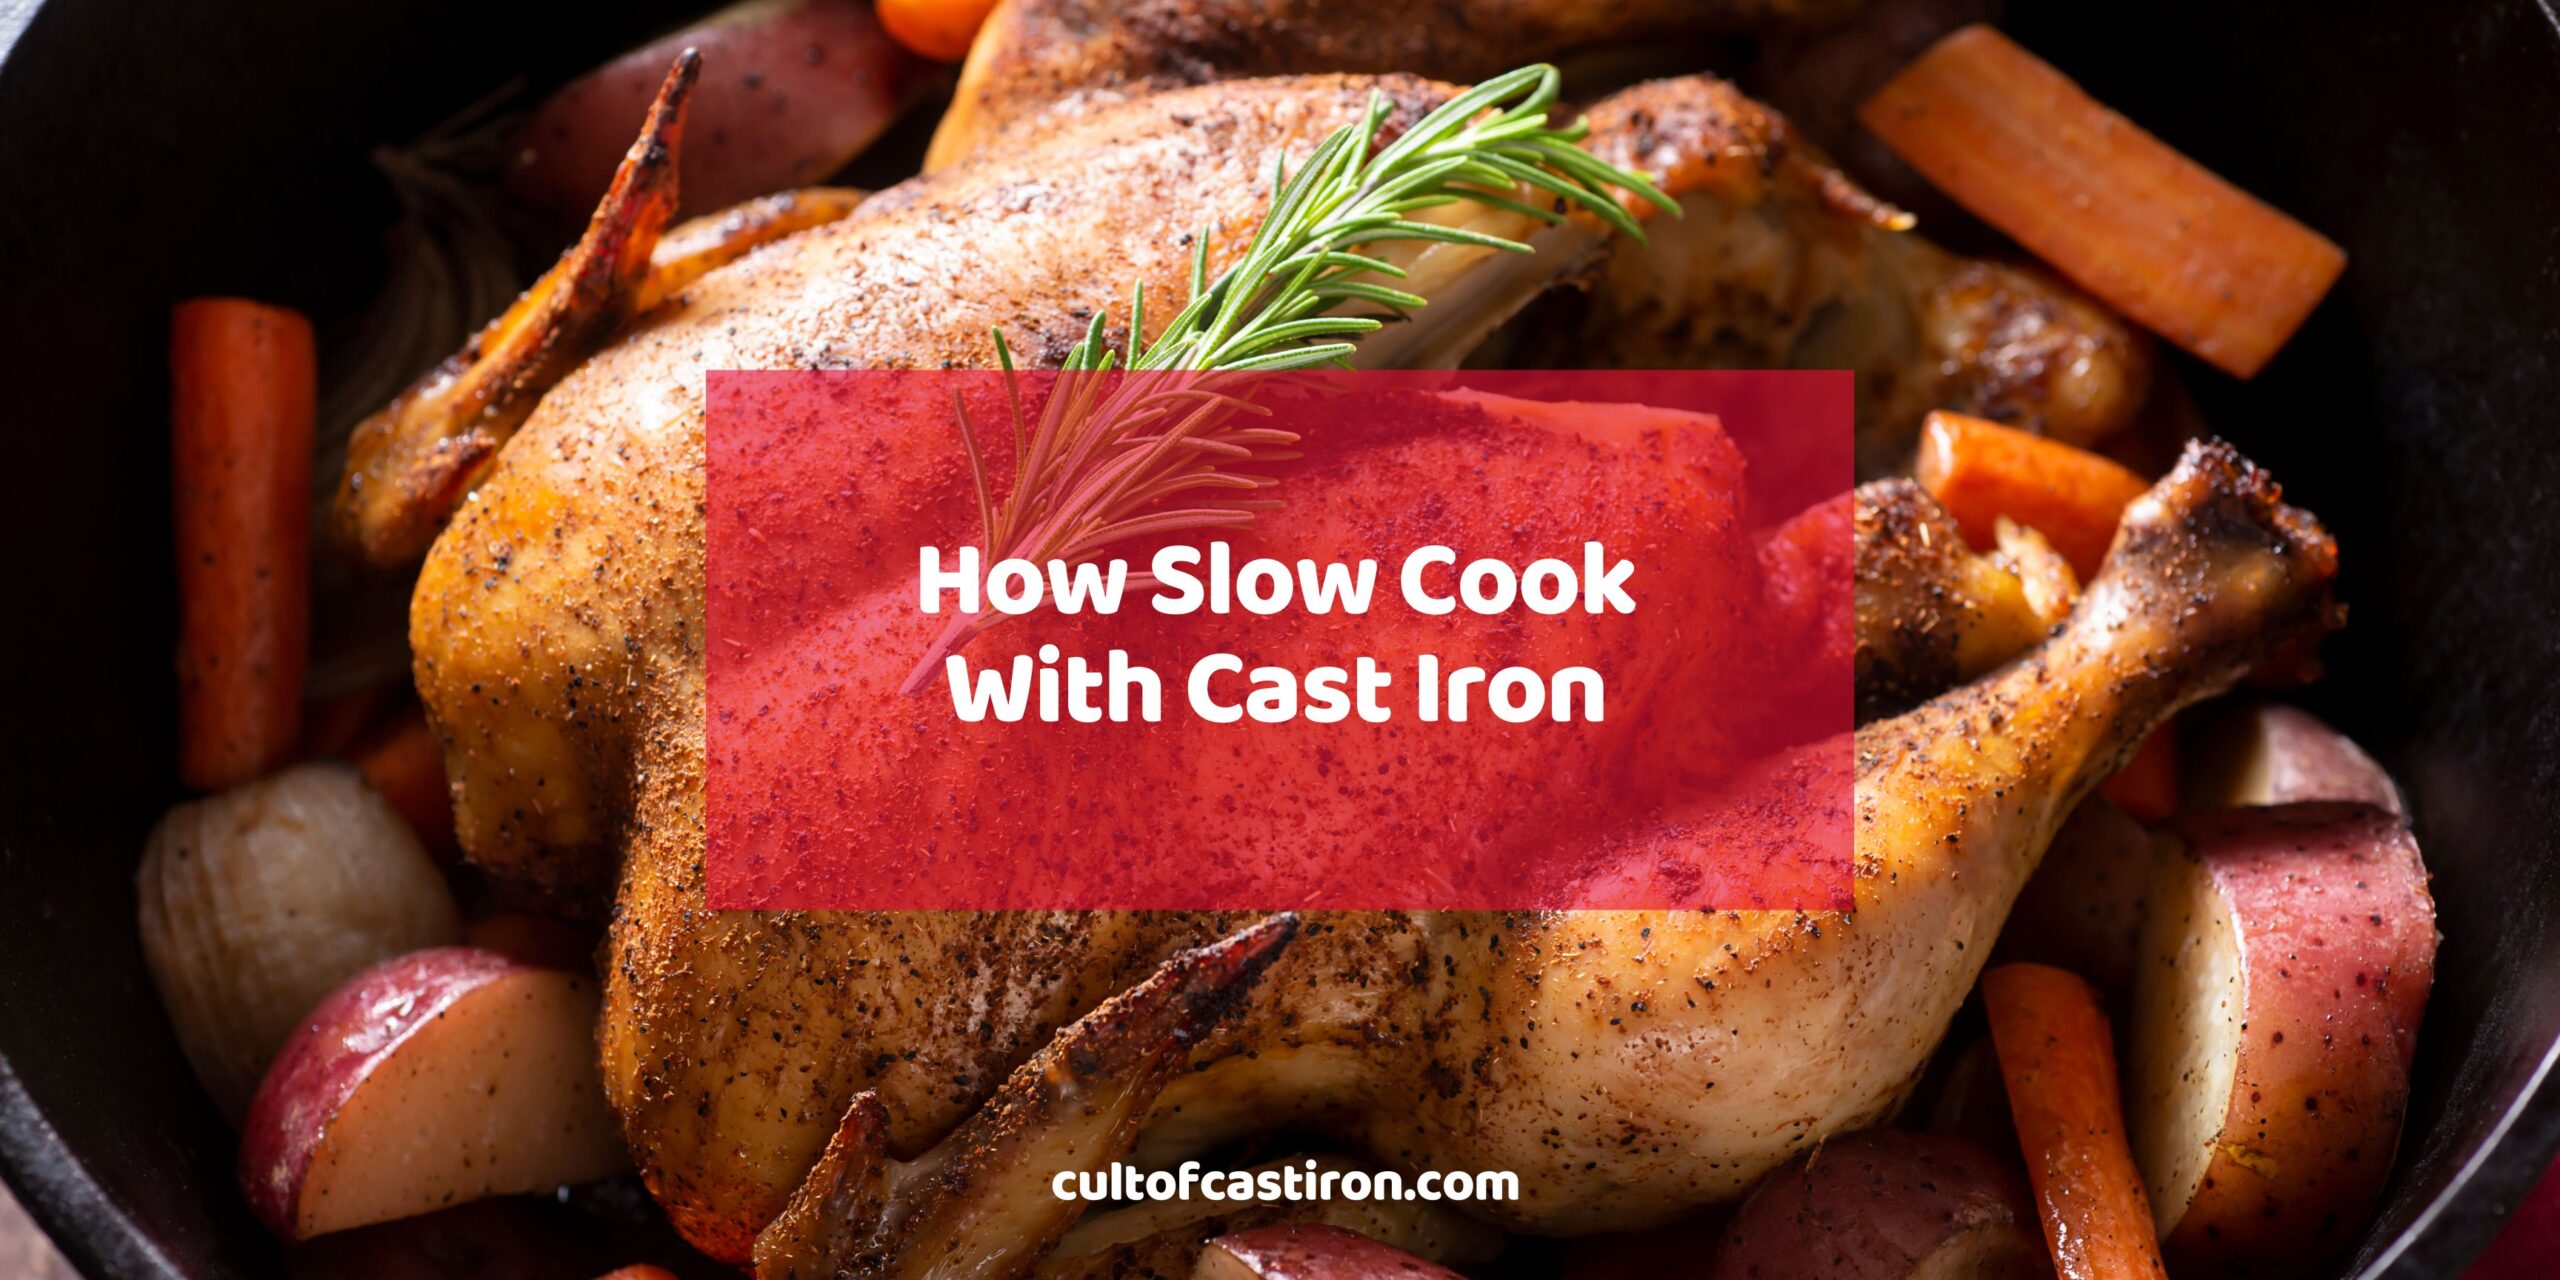 https://cultofcastiron.com/wp-content/uploads/2023/08/How-to-Slow-Cook-Without-a-Slow-Cooker-scaled.jpg